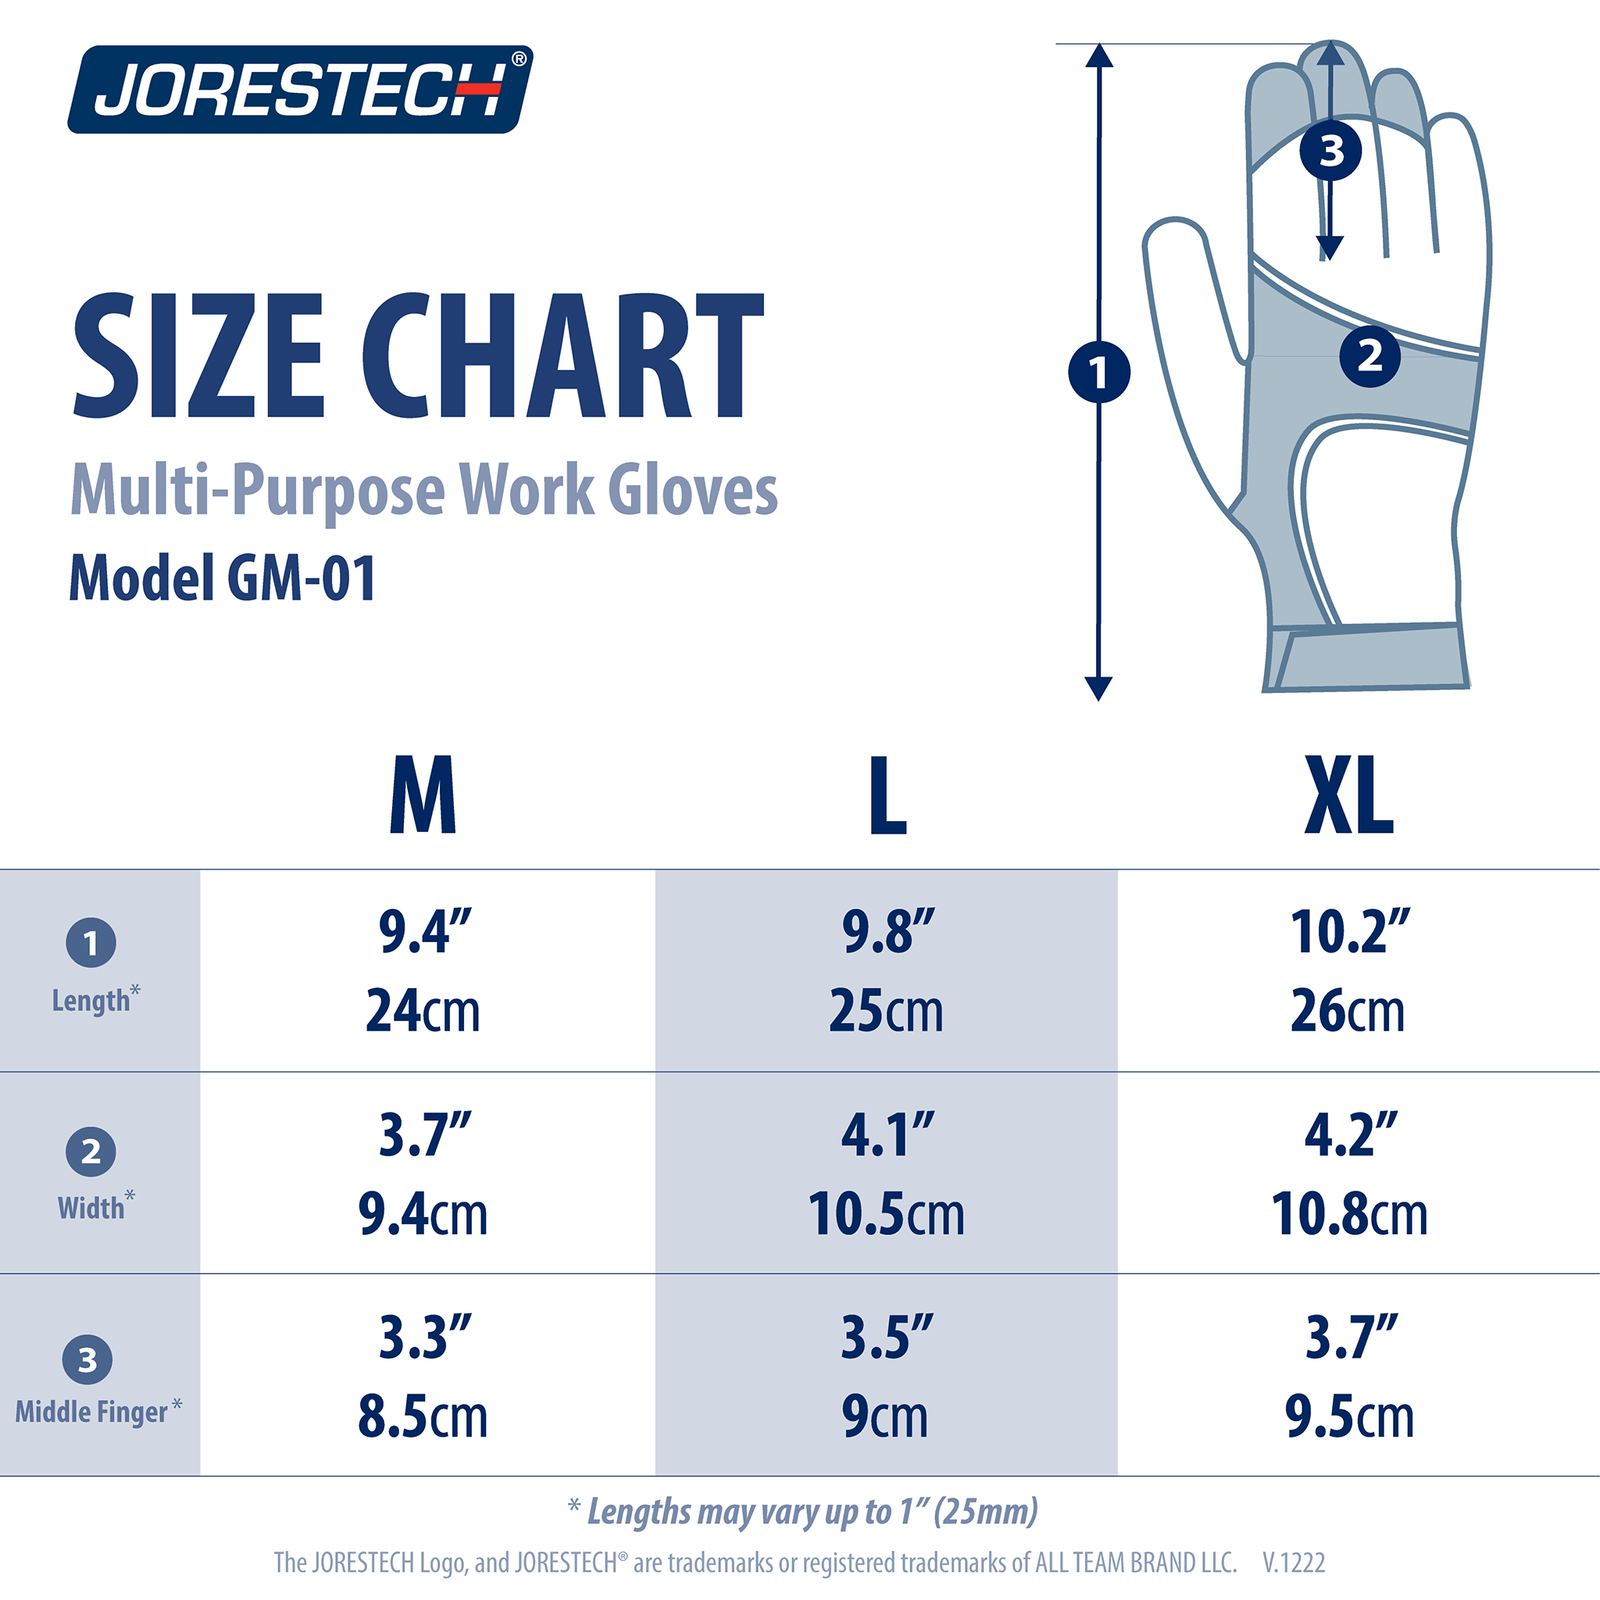 Size Chart for the JORESTECH Touchscreen Safety Work Gloves with Gold Leather Palms